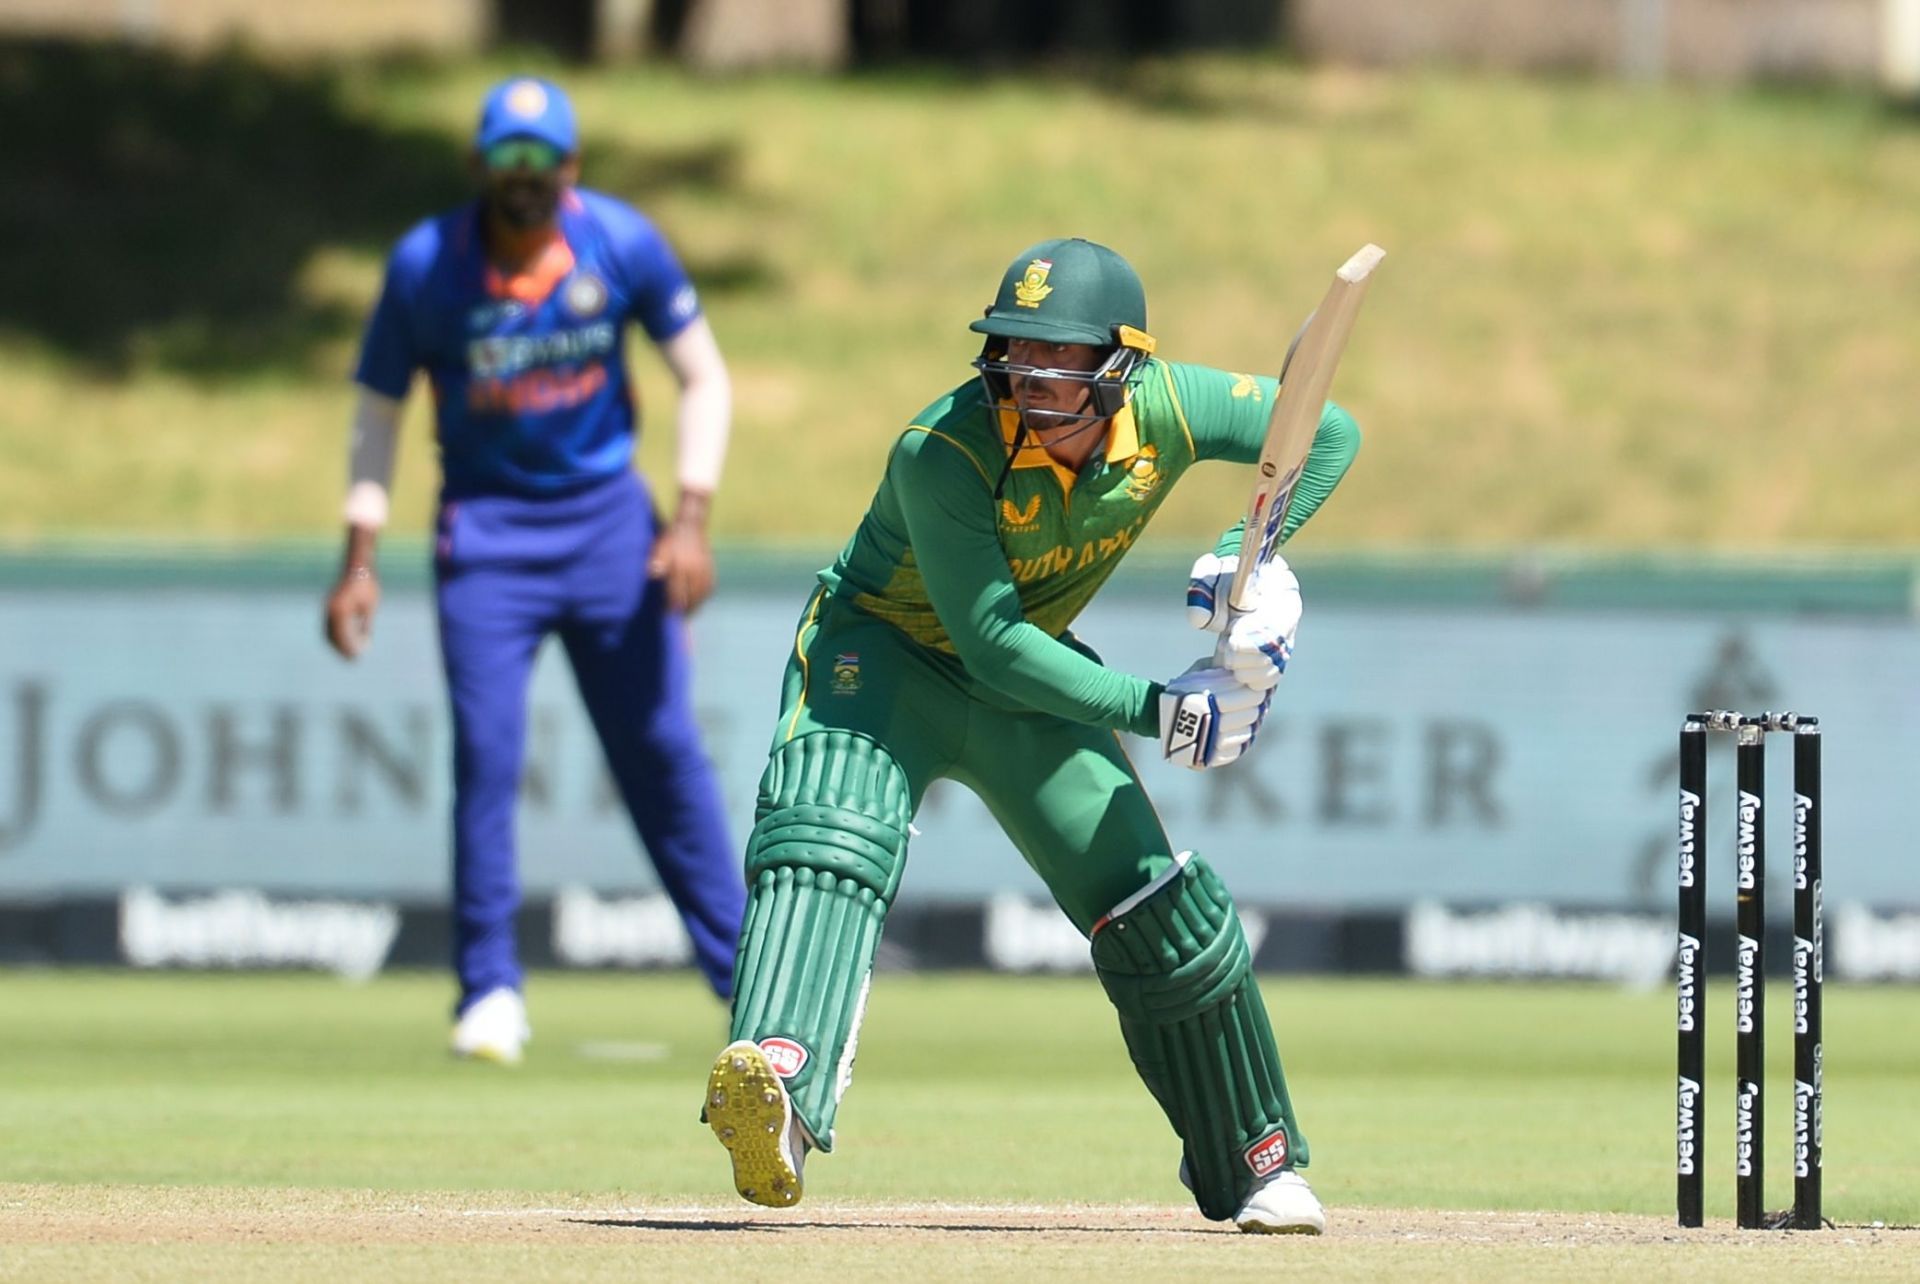 Quinton de Kock played a blazing knock in the second ODI against India